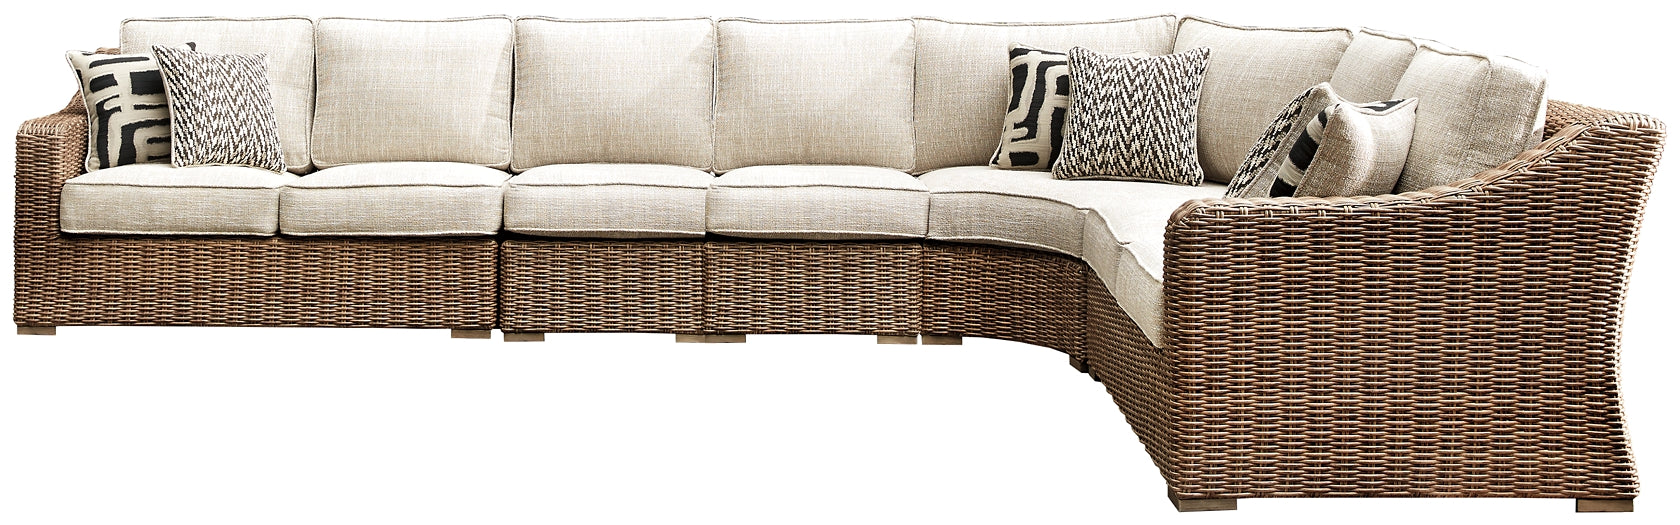 Beachcroft Signature Design by Ashley 5-Piece Sectional